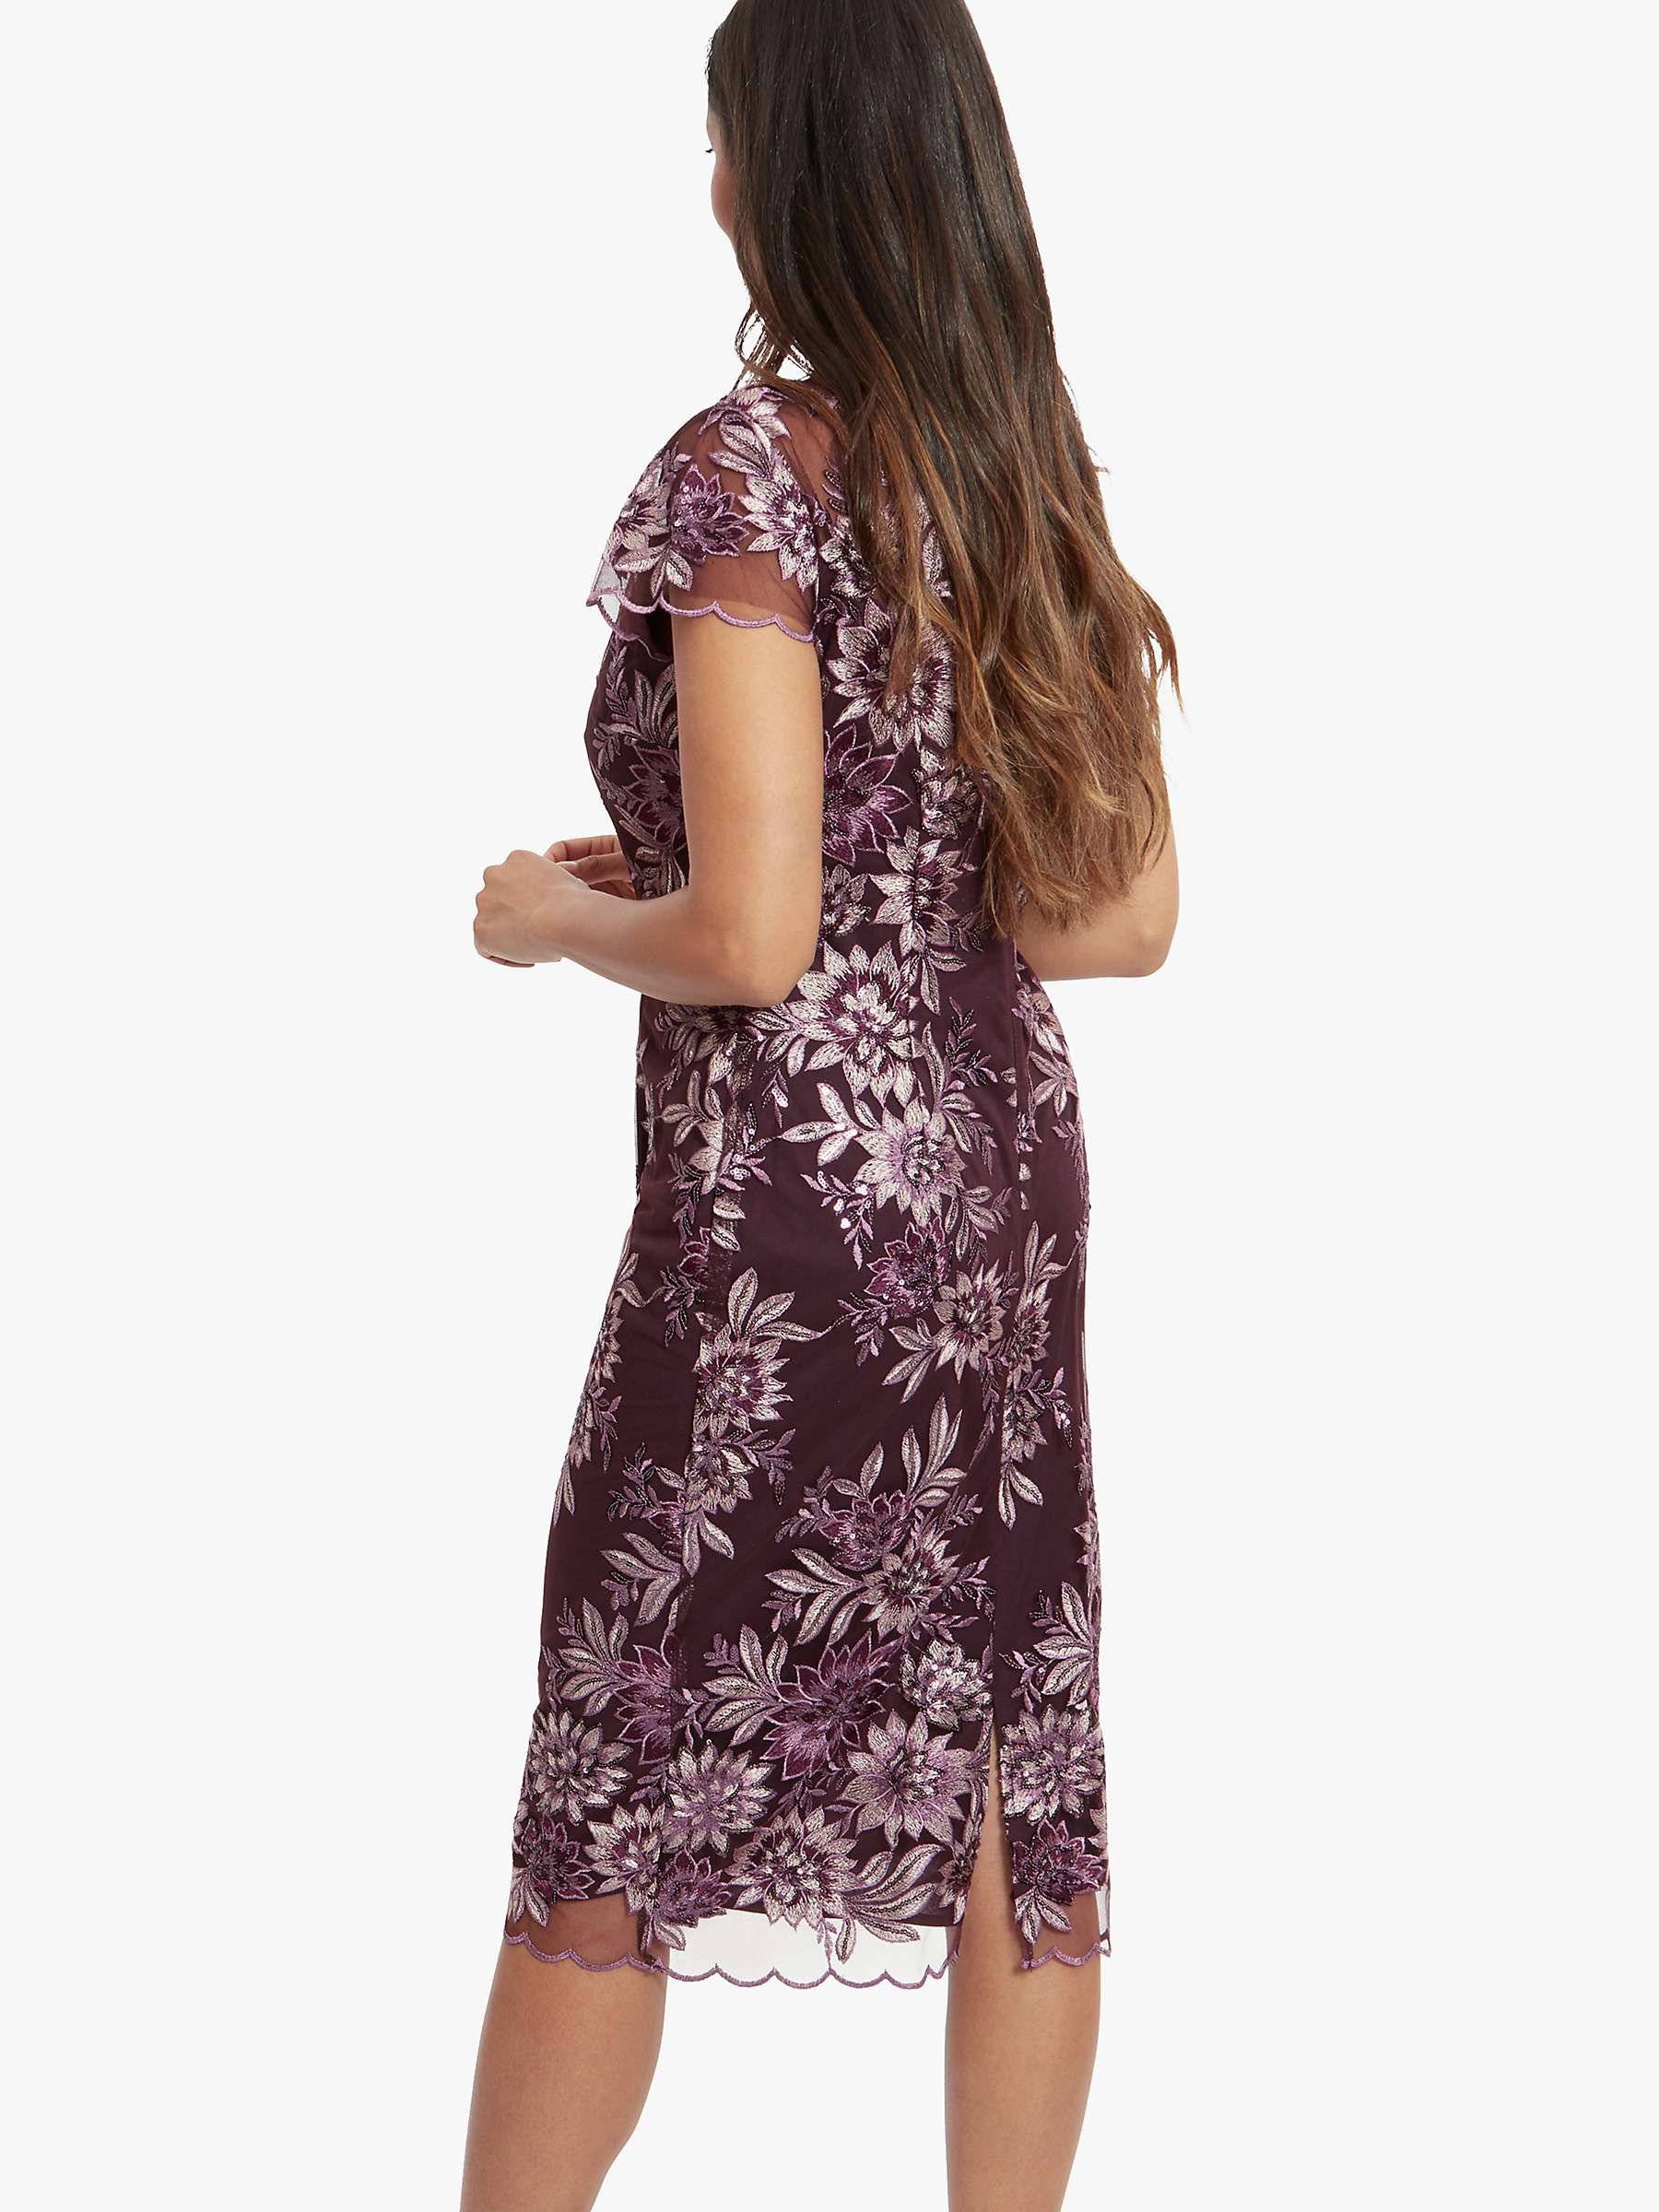 Buy Gina Bacconi Arianna Floral Embroidered Dress, Plum Online at johnlewis.com